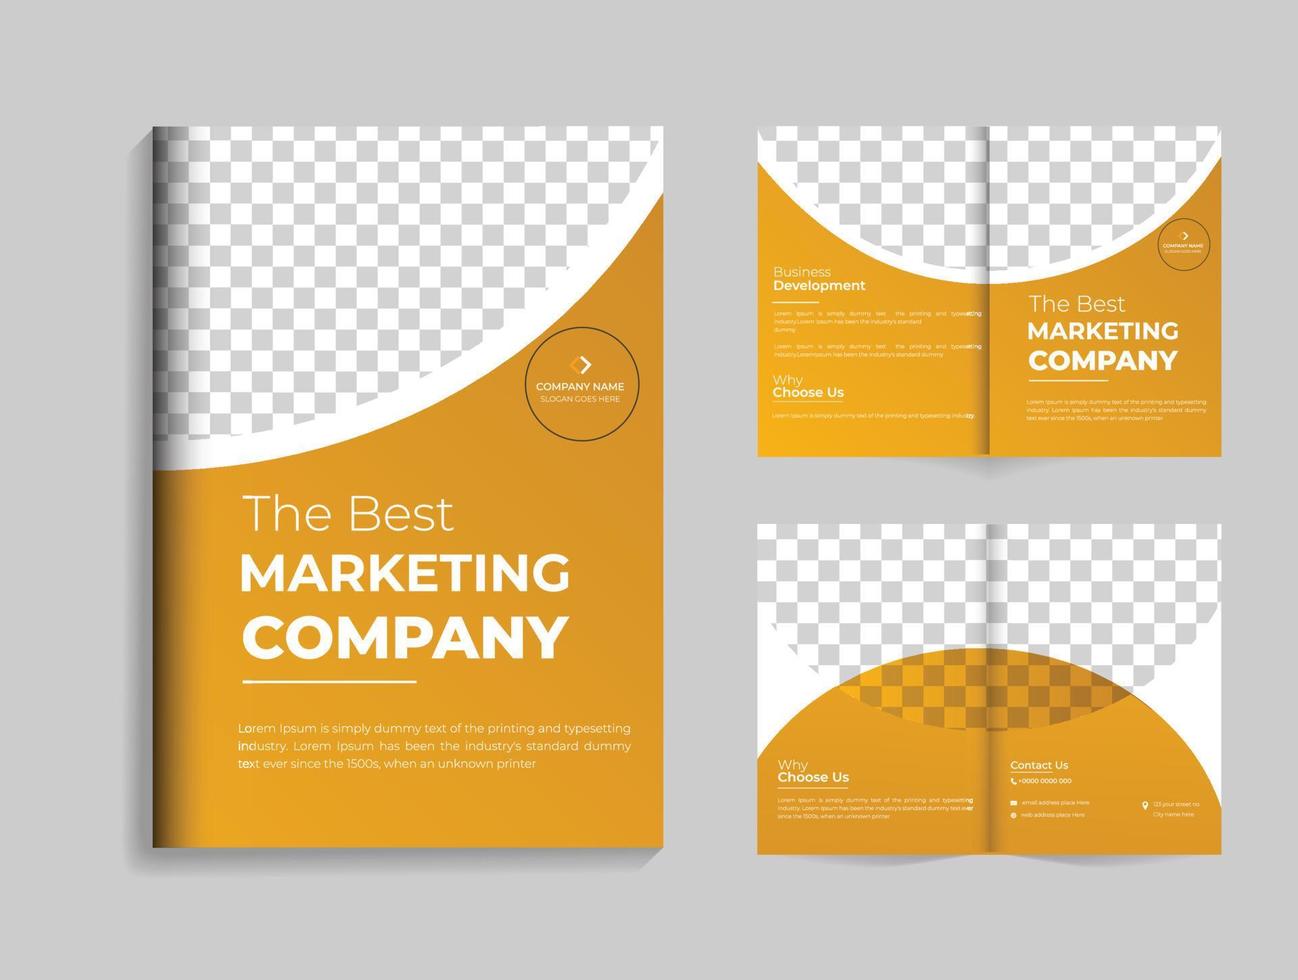 Corporate Brochure  Design Template in A4 size. It can be adapted to Brochures, Annual Reports, Magazines, Posters, Business Presentations, Portfolio, and Flyers vector